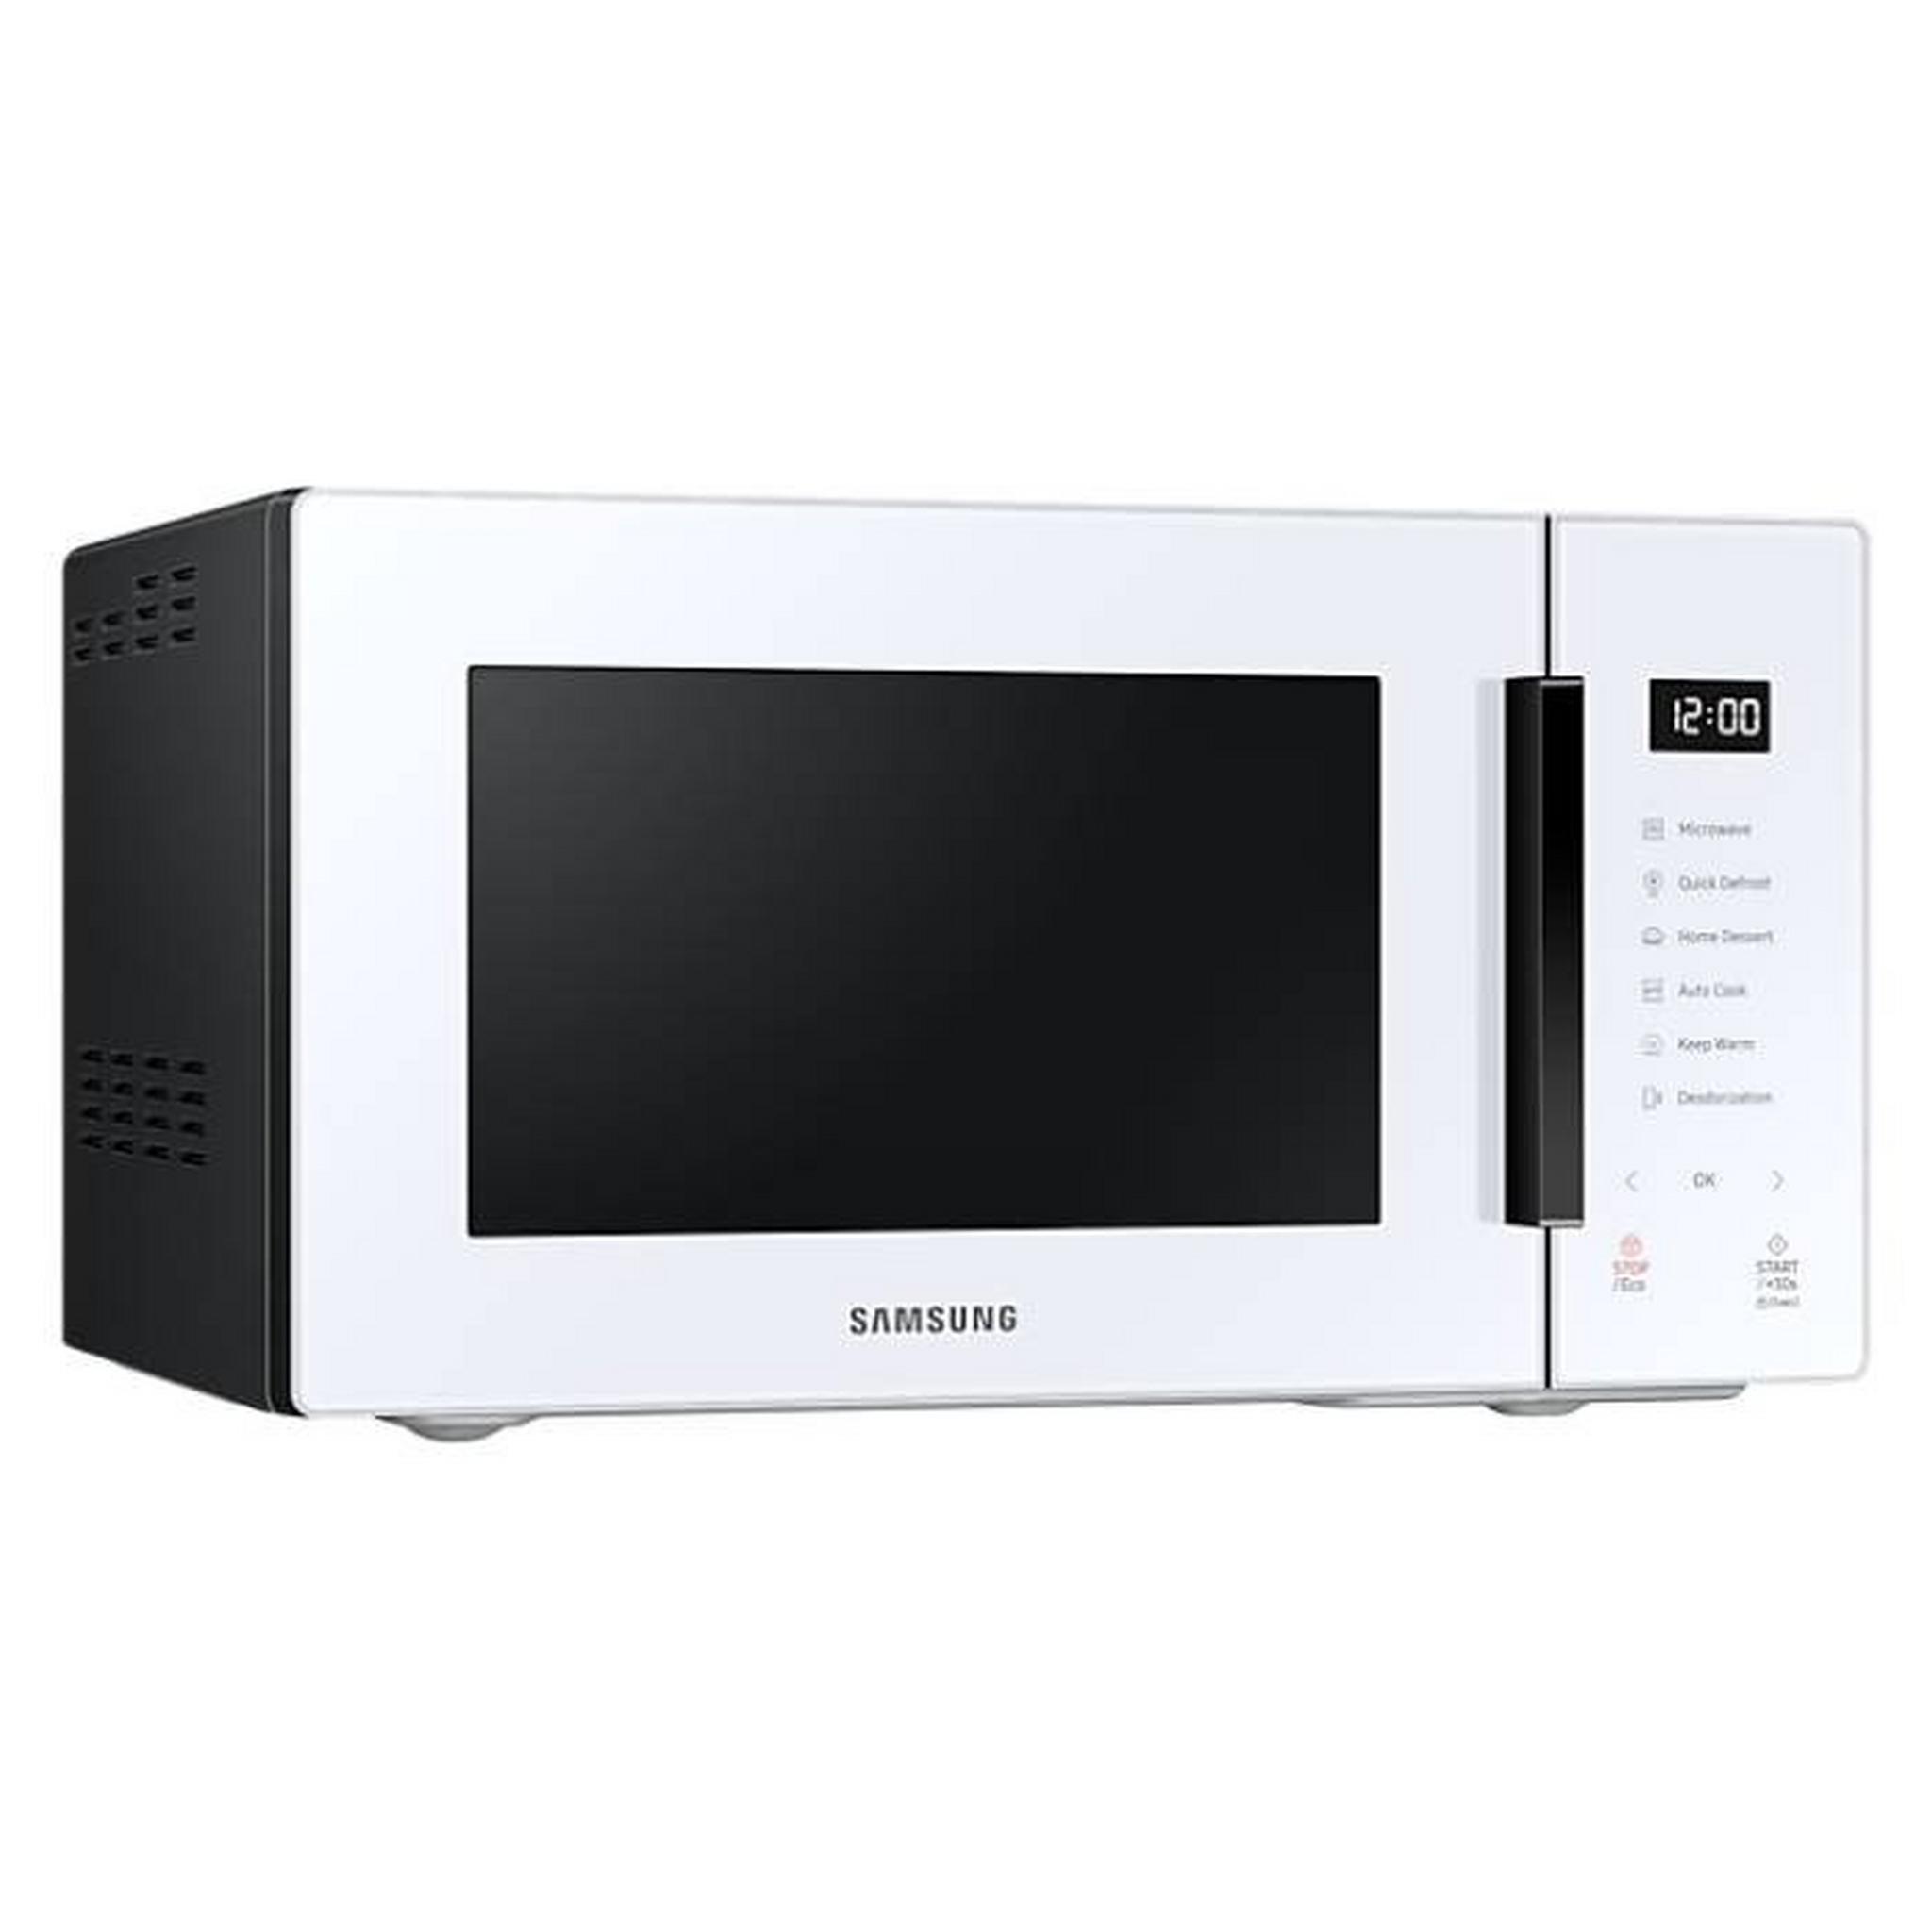 Samsung Bespoke Solo Microwave Oven 23 Liters,750 W, MS23T5018AW/SG – White